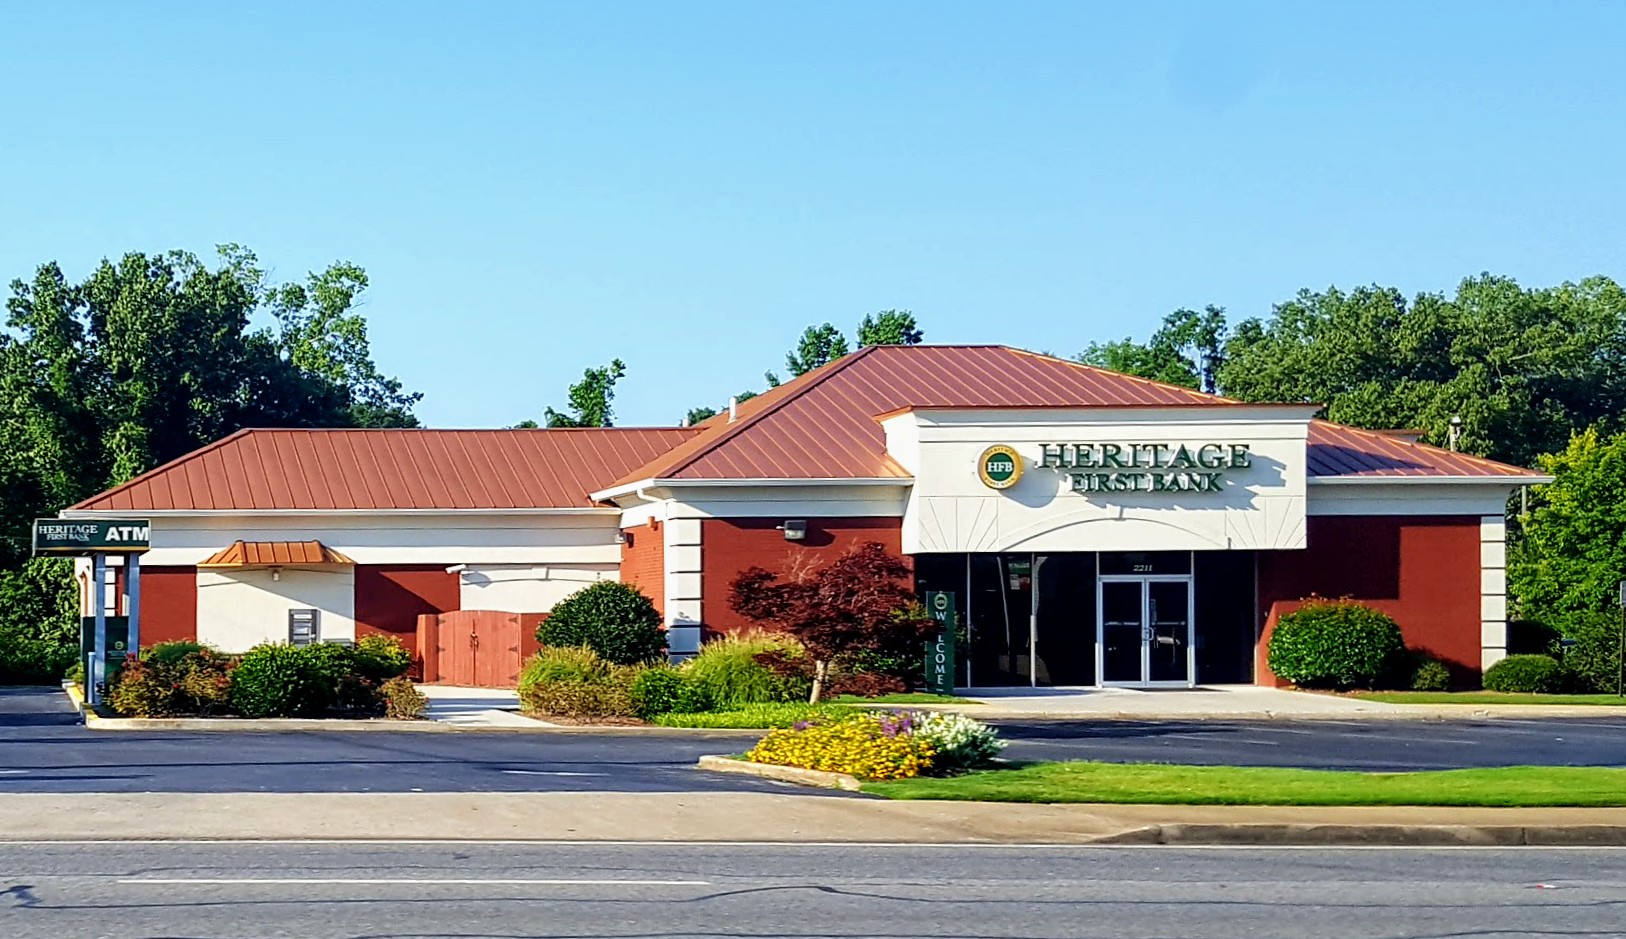 Heritage First Bank